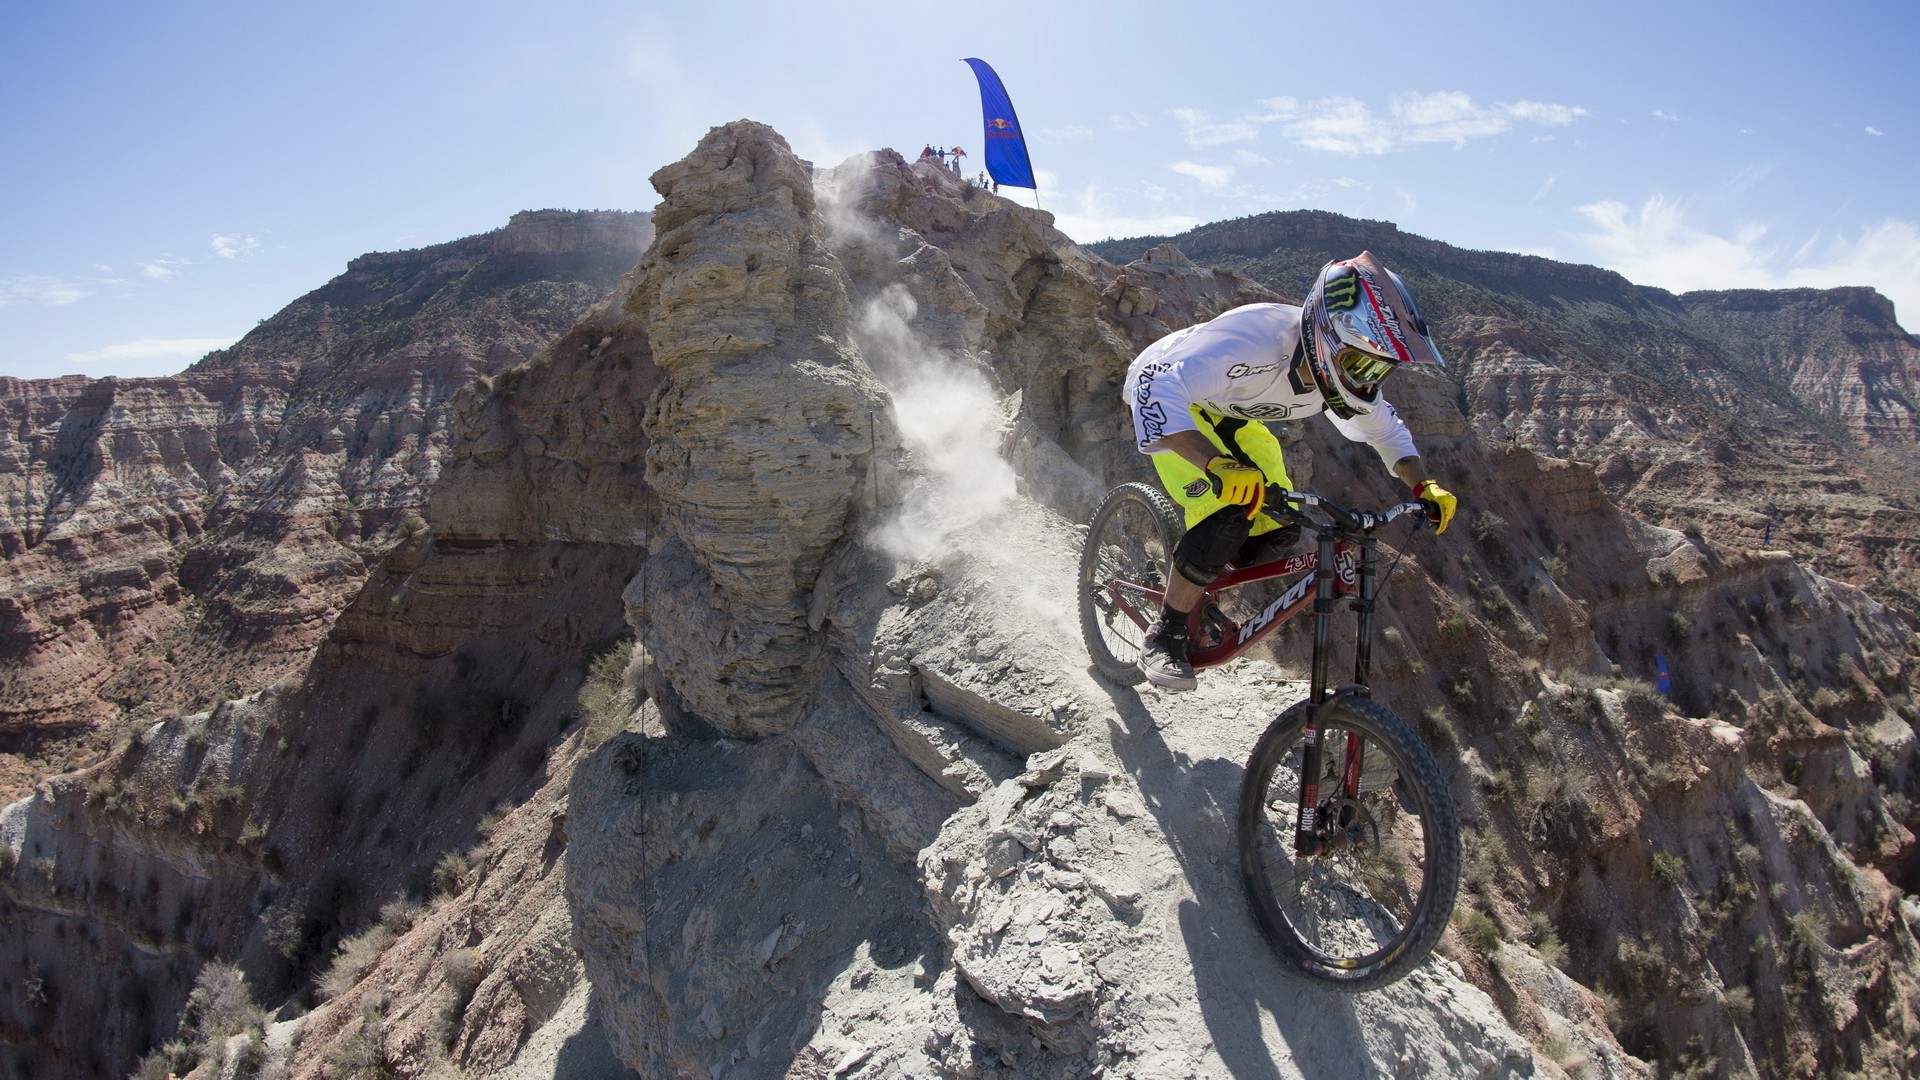 Bicycles Sports Extreme Red Bull Ram Wallpaper